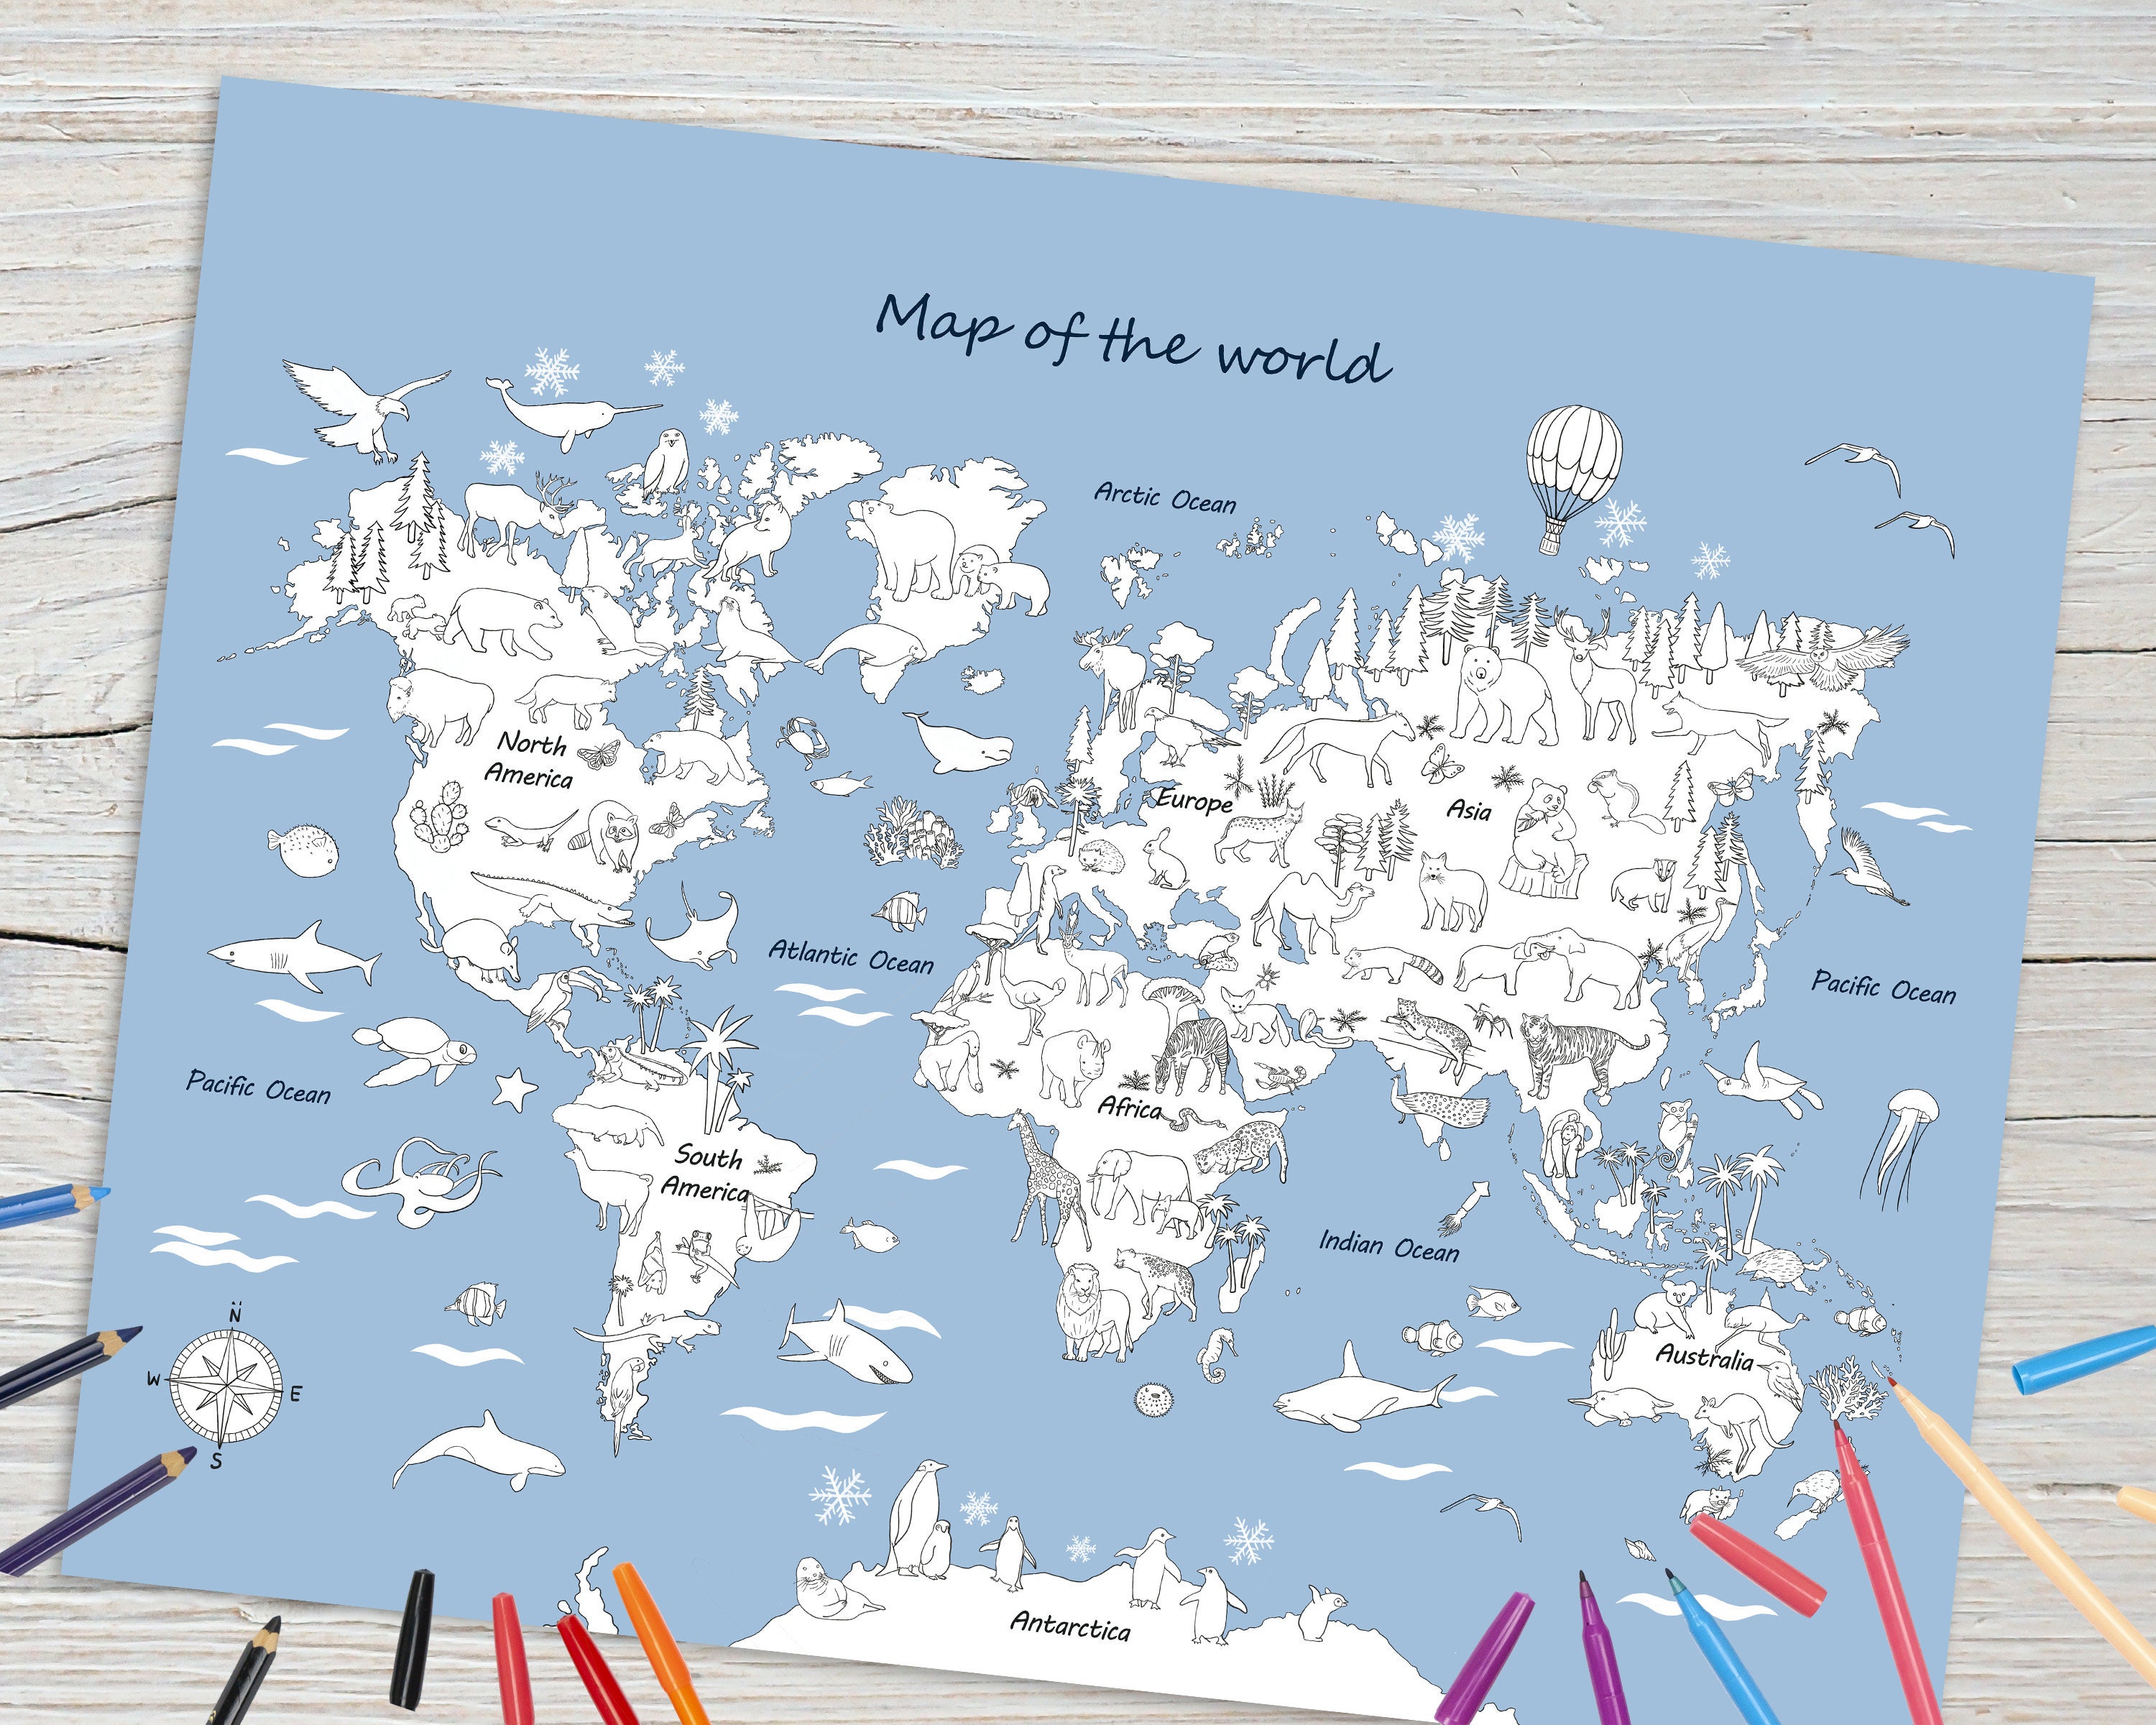  Giant Coloring Poster Jumbo Coloring World Map for Kids Large  Coloring Book Kids World Map Coloring Poster Wall Doodle Art Coloring  Education Poster for Classroom Home Birthday Party, 45.3 x 31.5